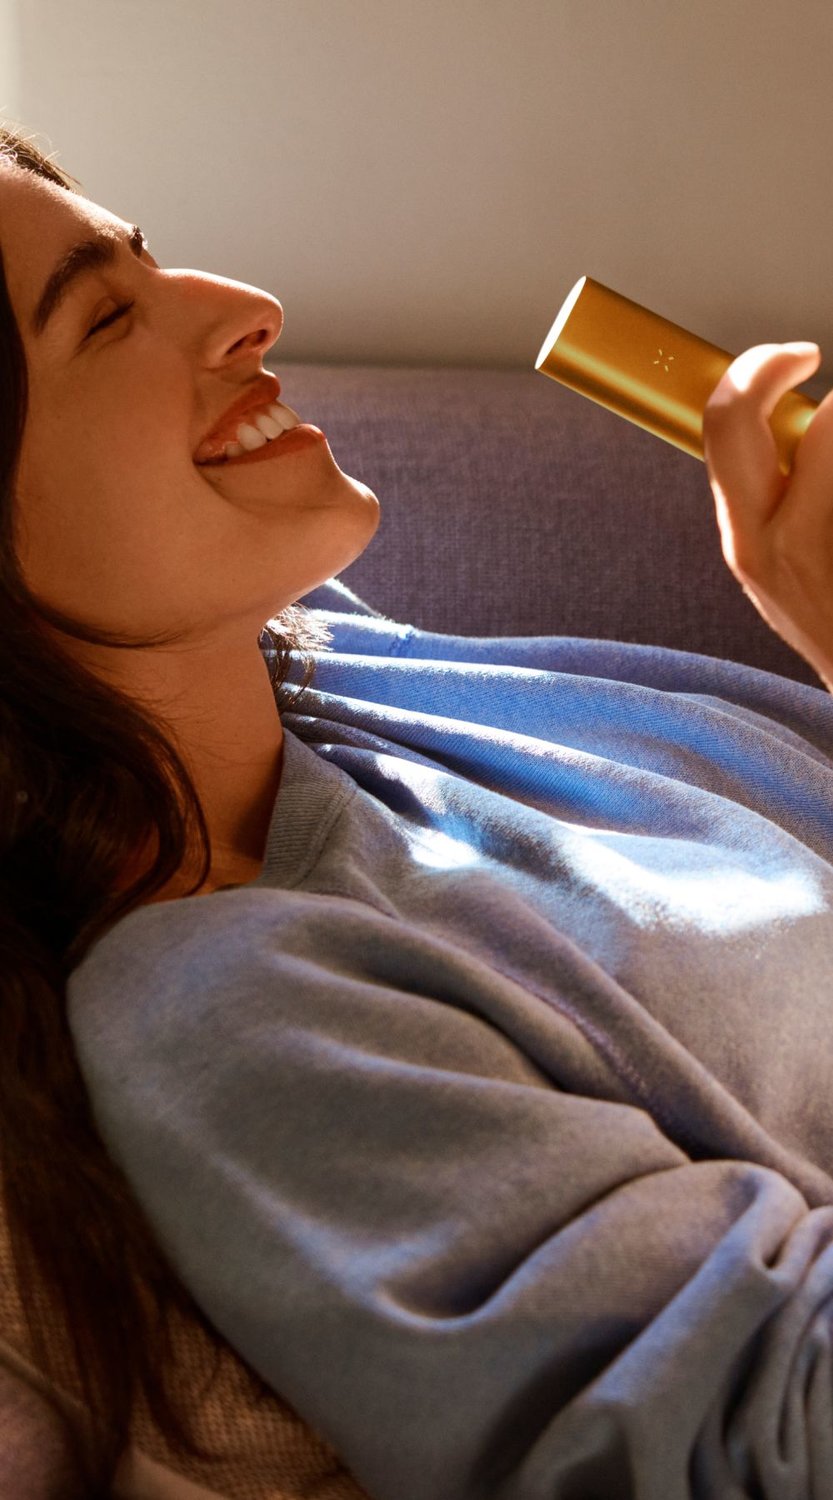 Woman relaxing on a couch enjoying a PAX vaporizer